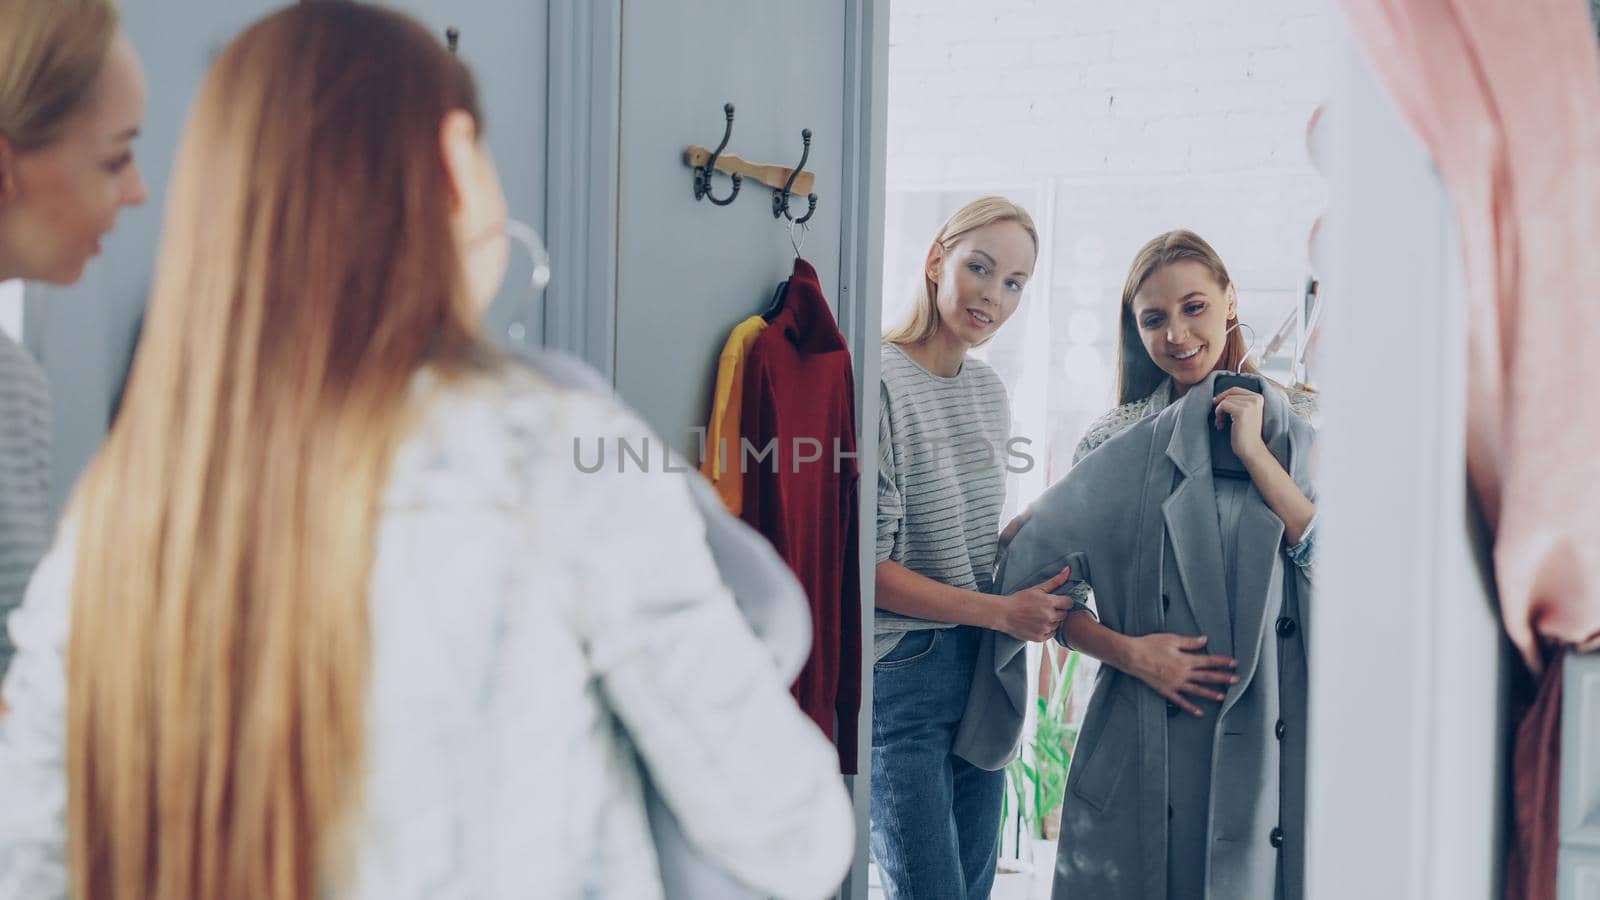 Pretty young woman is checking fashionable coat in fitting room with her friend helping her to appraise garment. They are talking, gesturing and looking at clothing in large mirror.